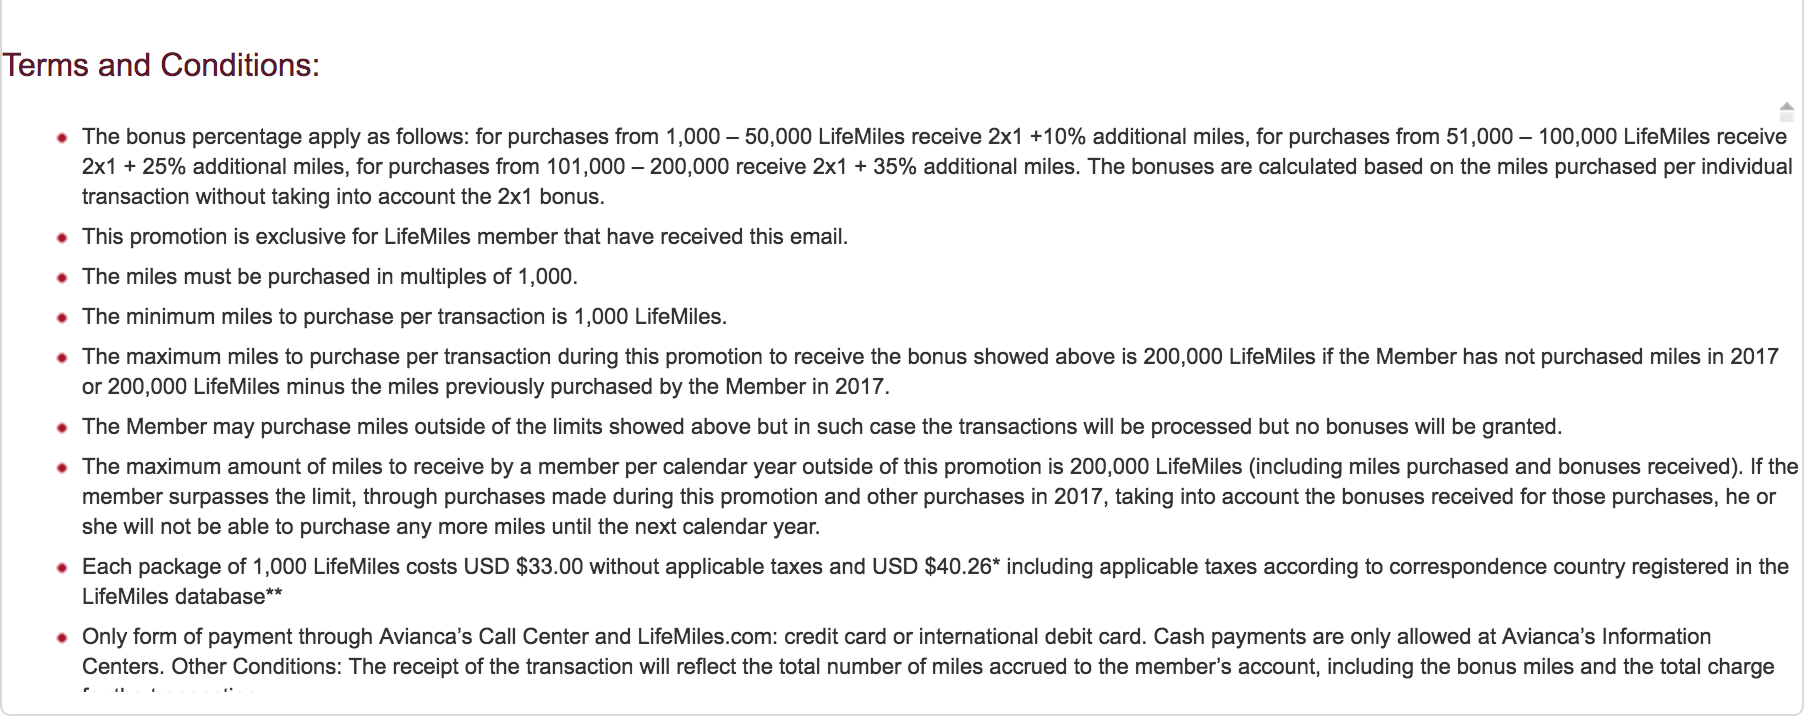 Avianca LifeMiles 2-for-1 Terms and Conditions (Image: Avianca)